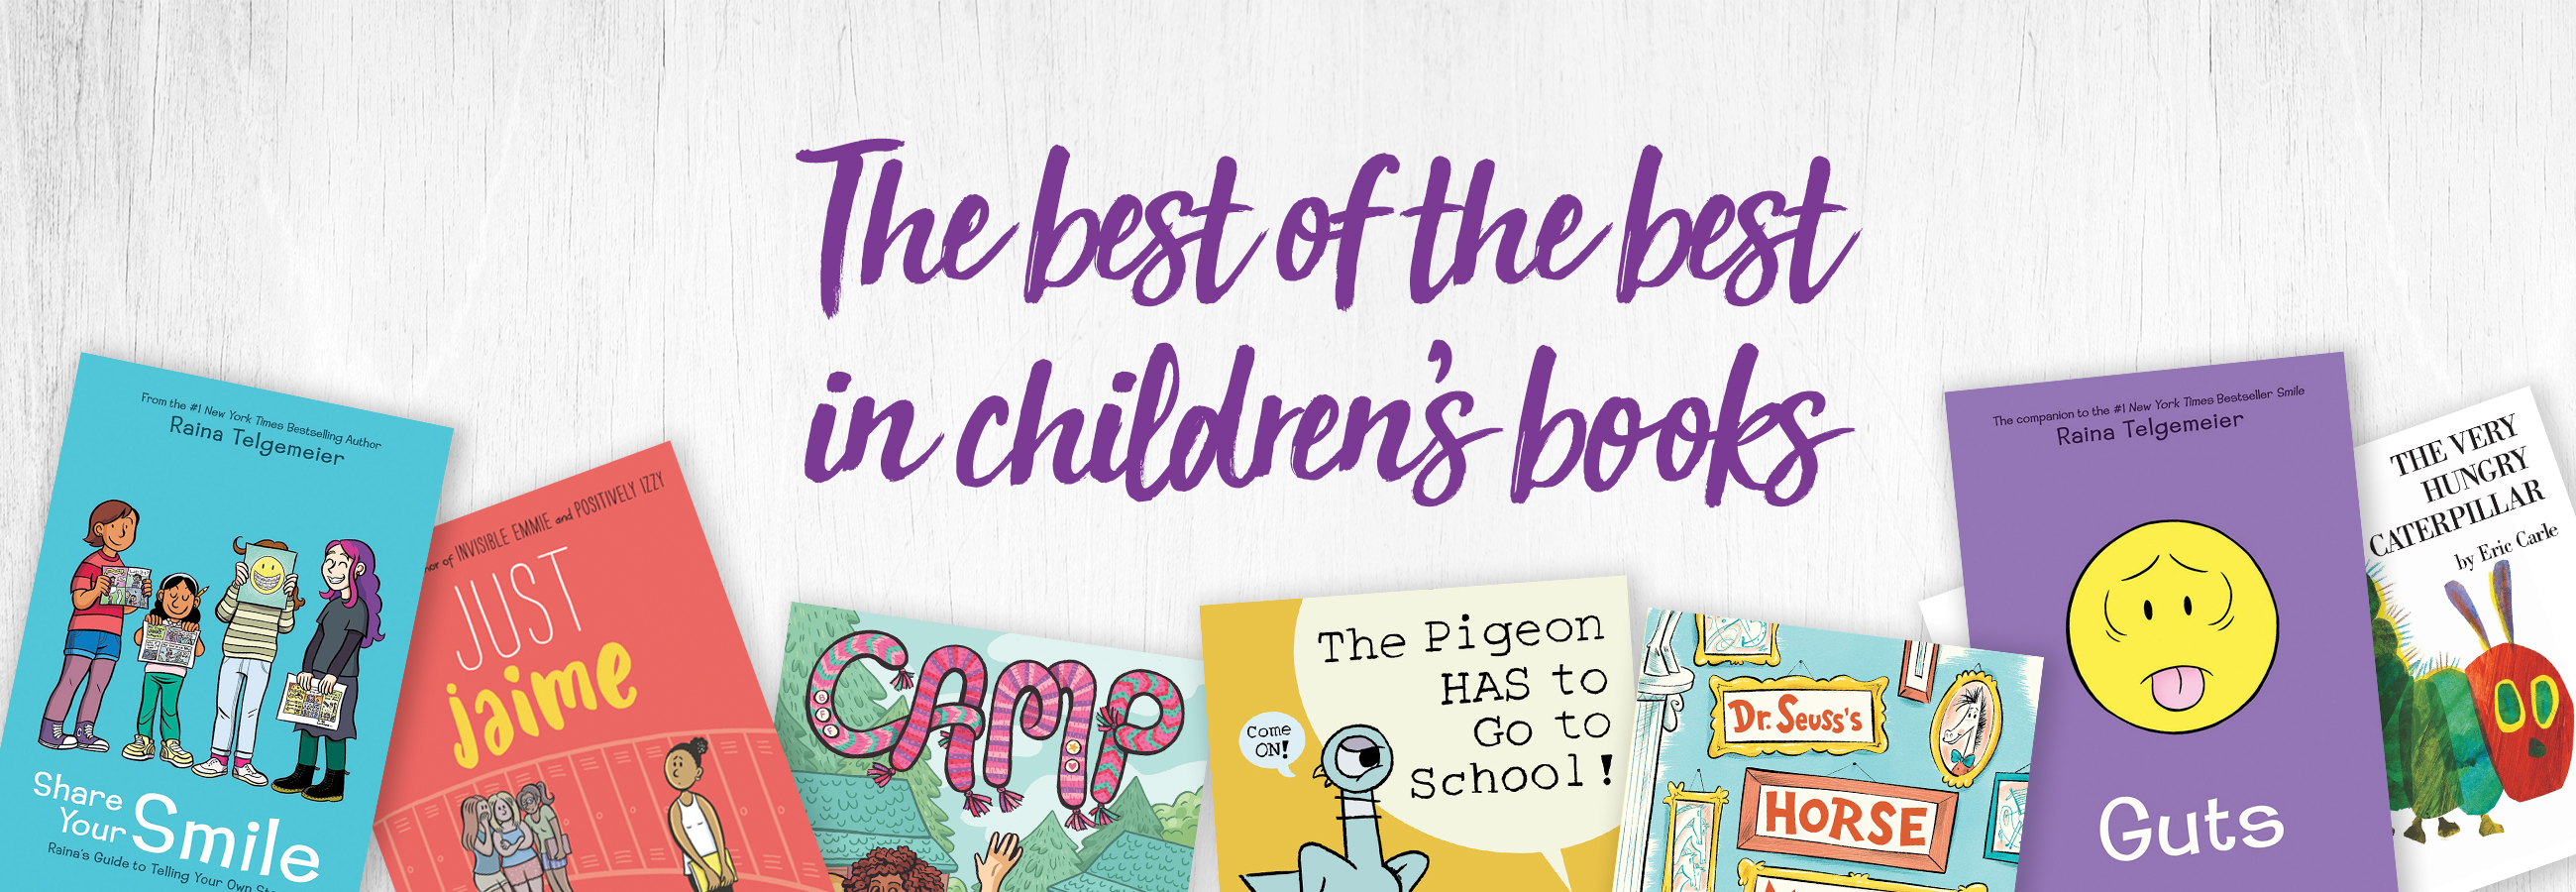 The Best Of The Best In Childrens Books - 